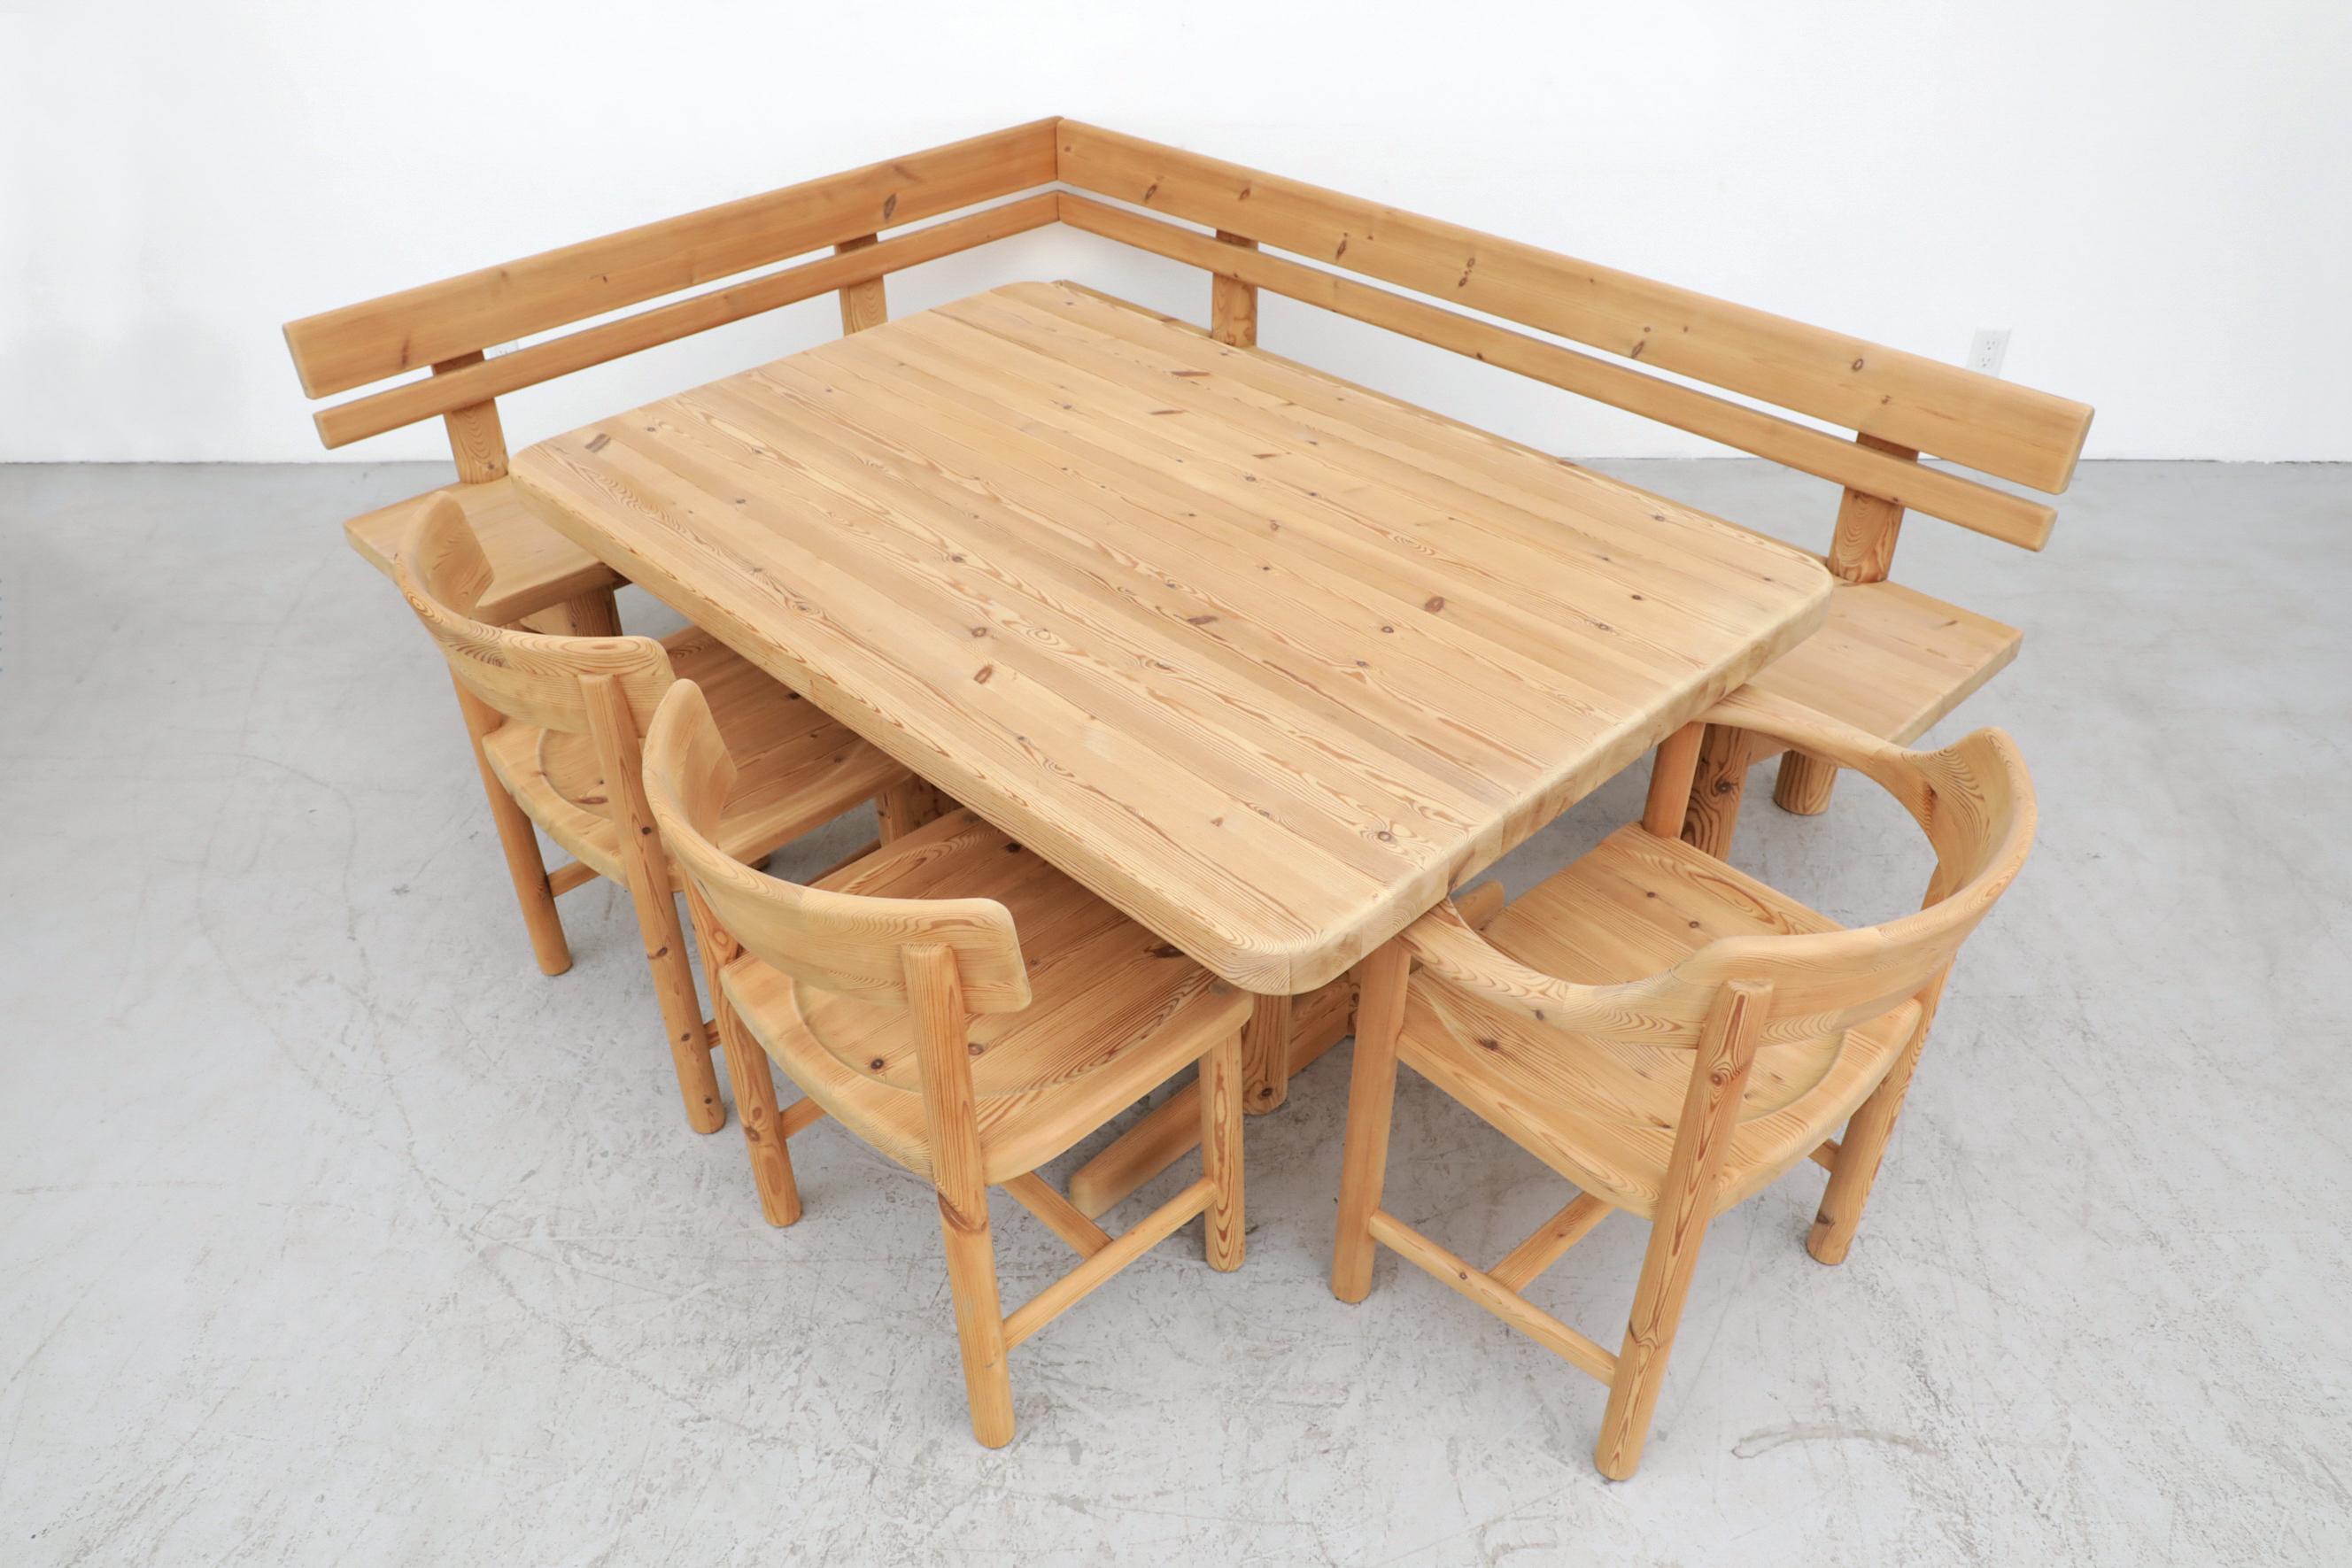 Stunning Rainer Daumiller carved pine dining set consisting of two benches that clip together, two side chairs, an armchair and an impressive dining table. A solid, sturdy set with beautiful wood grain, made by quality craftsmen. In good original